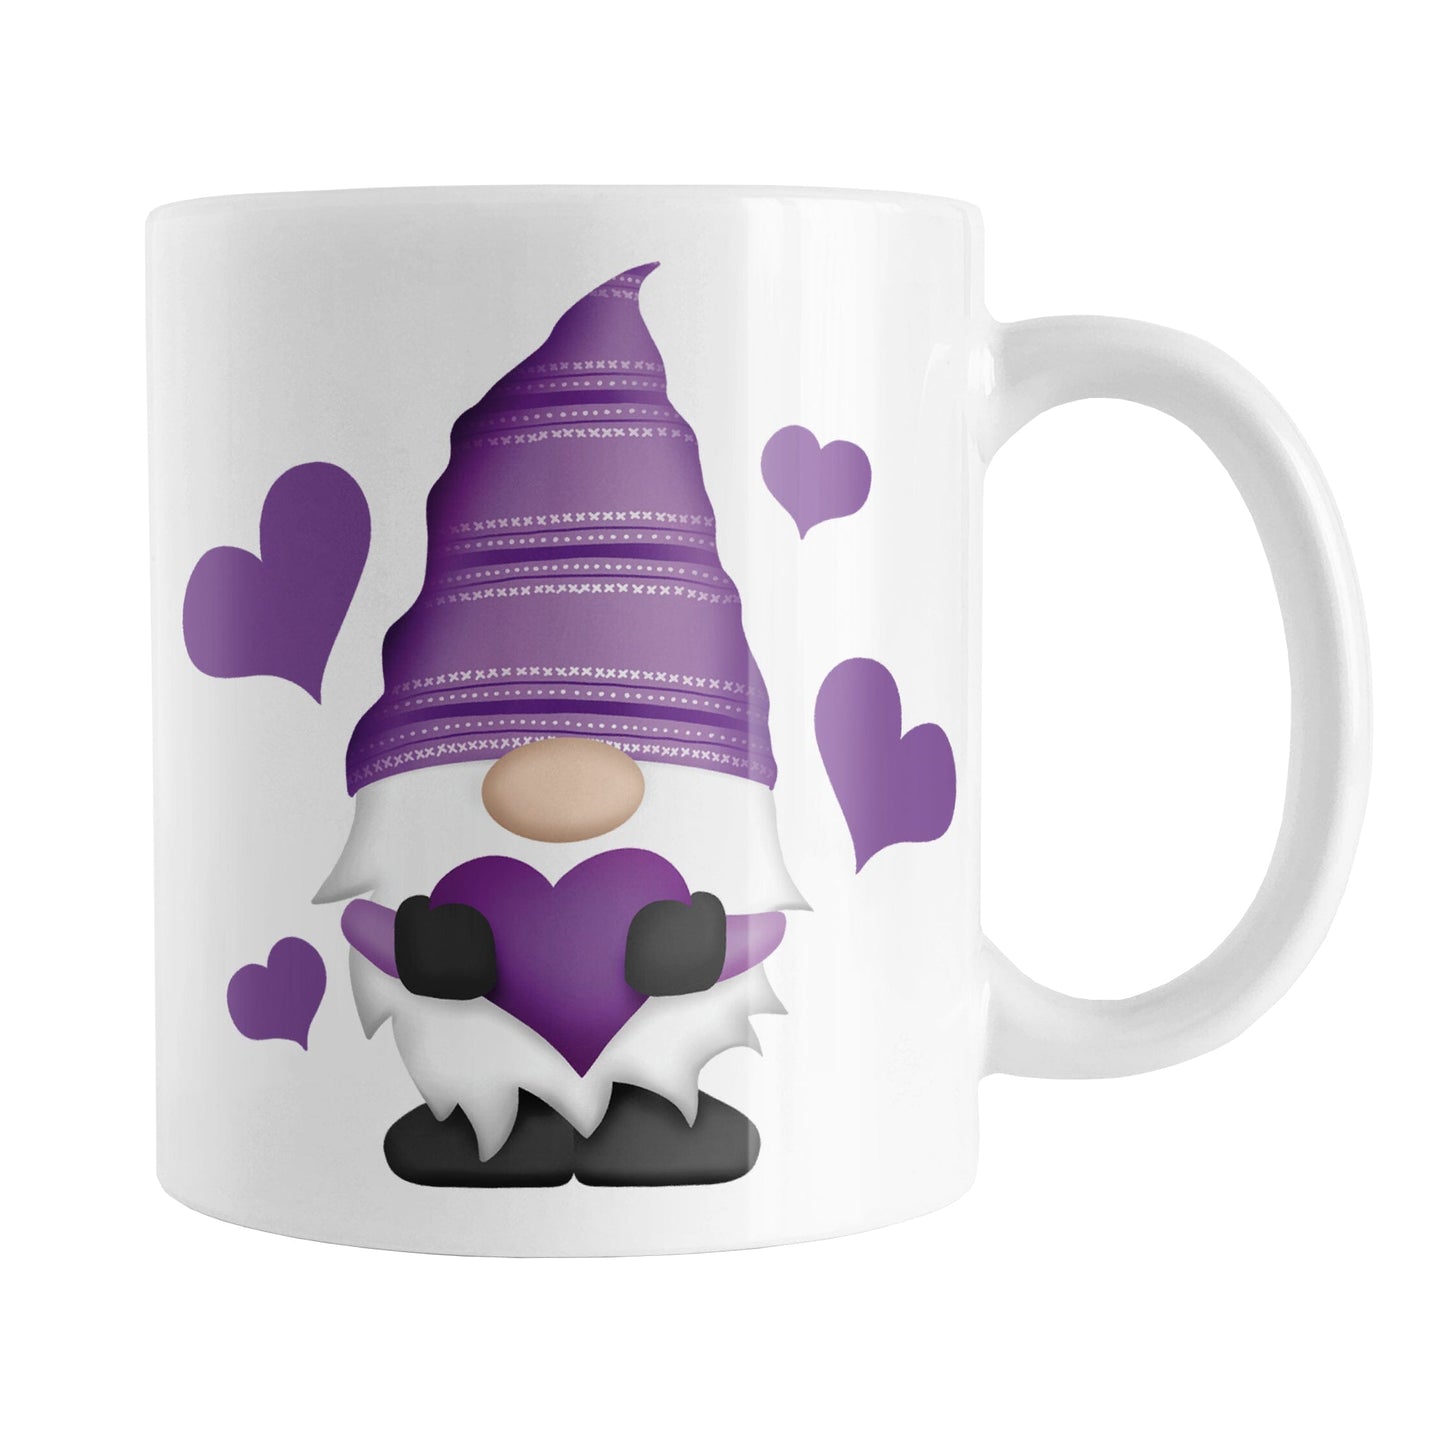 Purple Heart Gnome Mug (11oz) at Amy's Coffee Mugs. A ceramic coffee mug designed with an adorable gnome wearing a festive purple hat and holding a large purple heart with bold purple hearts around him. This loving gnome illustration is on both sides of the mug.